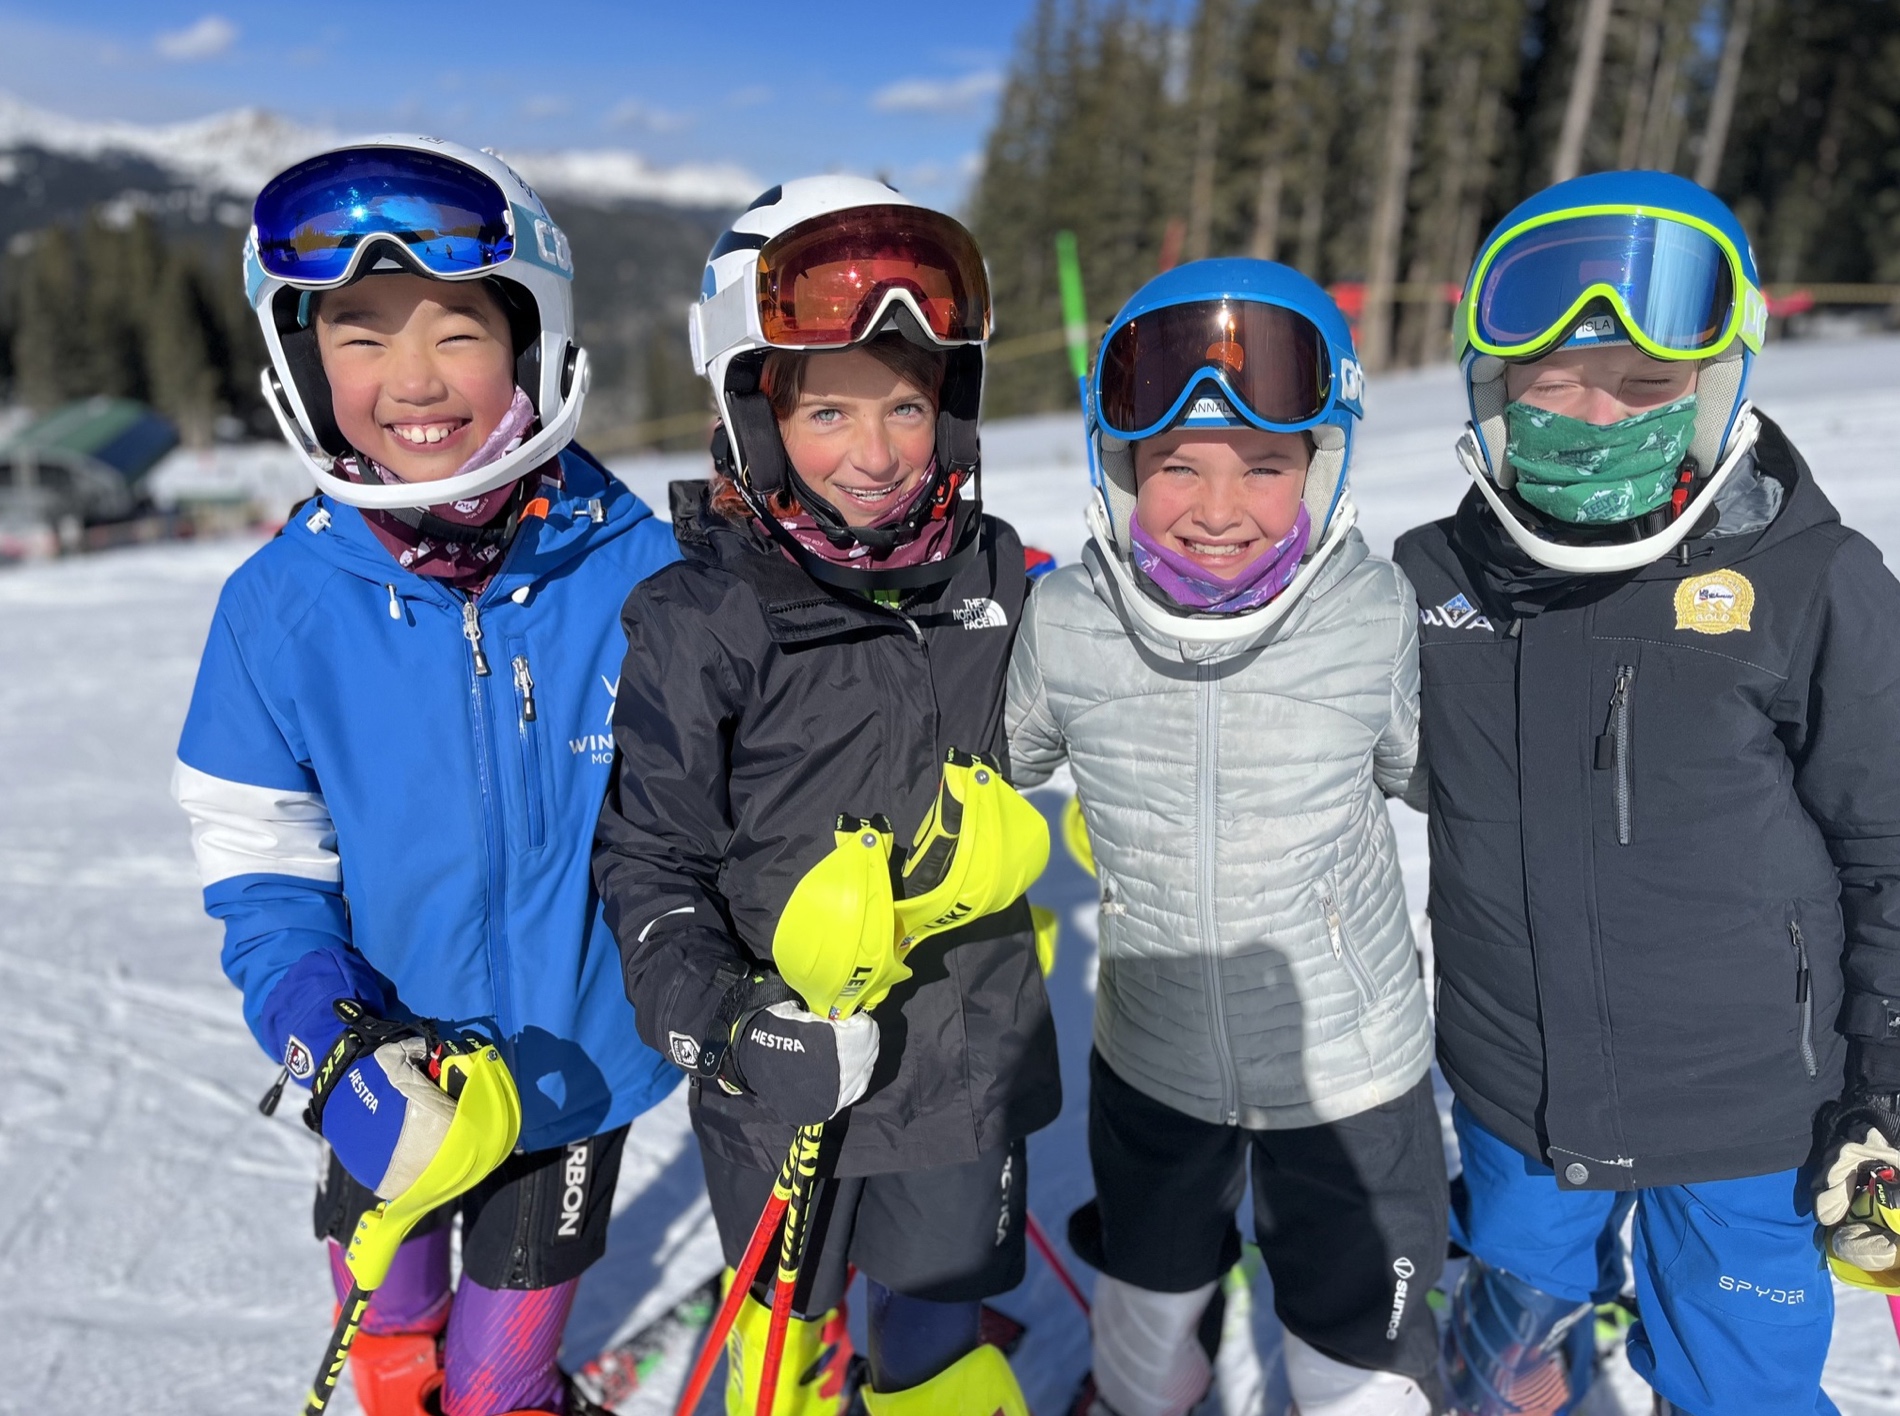 A New Women's Ski Camp Pairs Gear-Testing With Skills Training - 5280